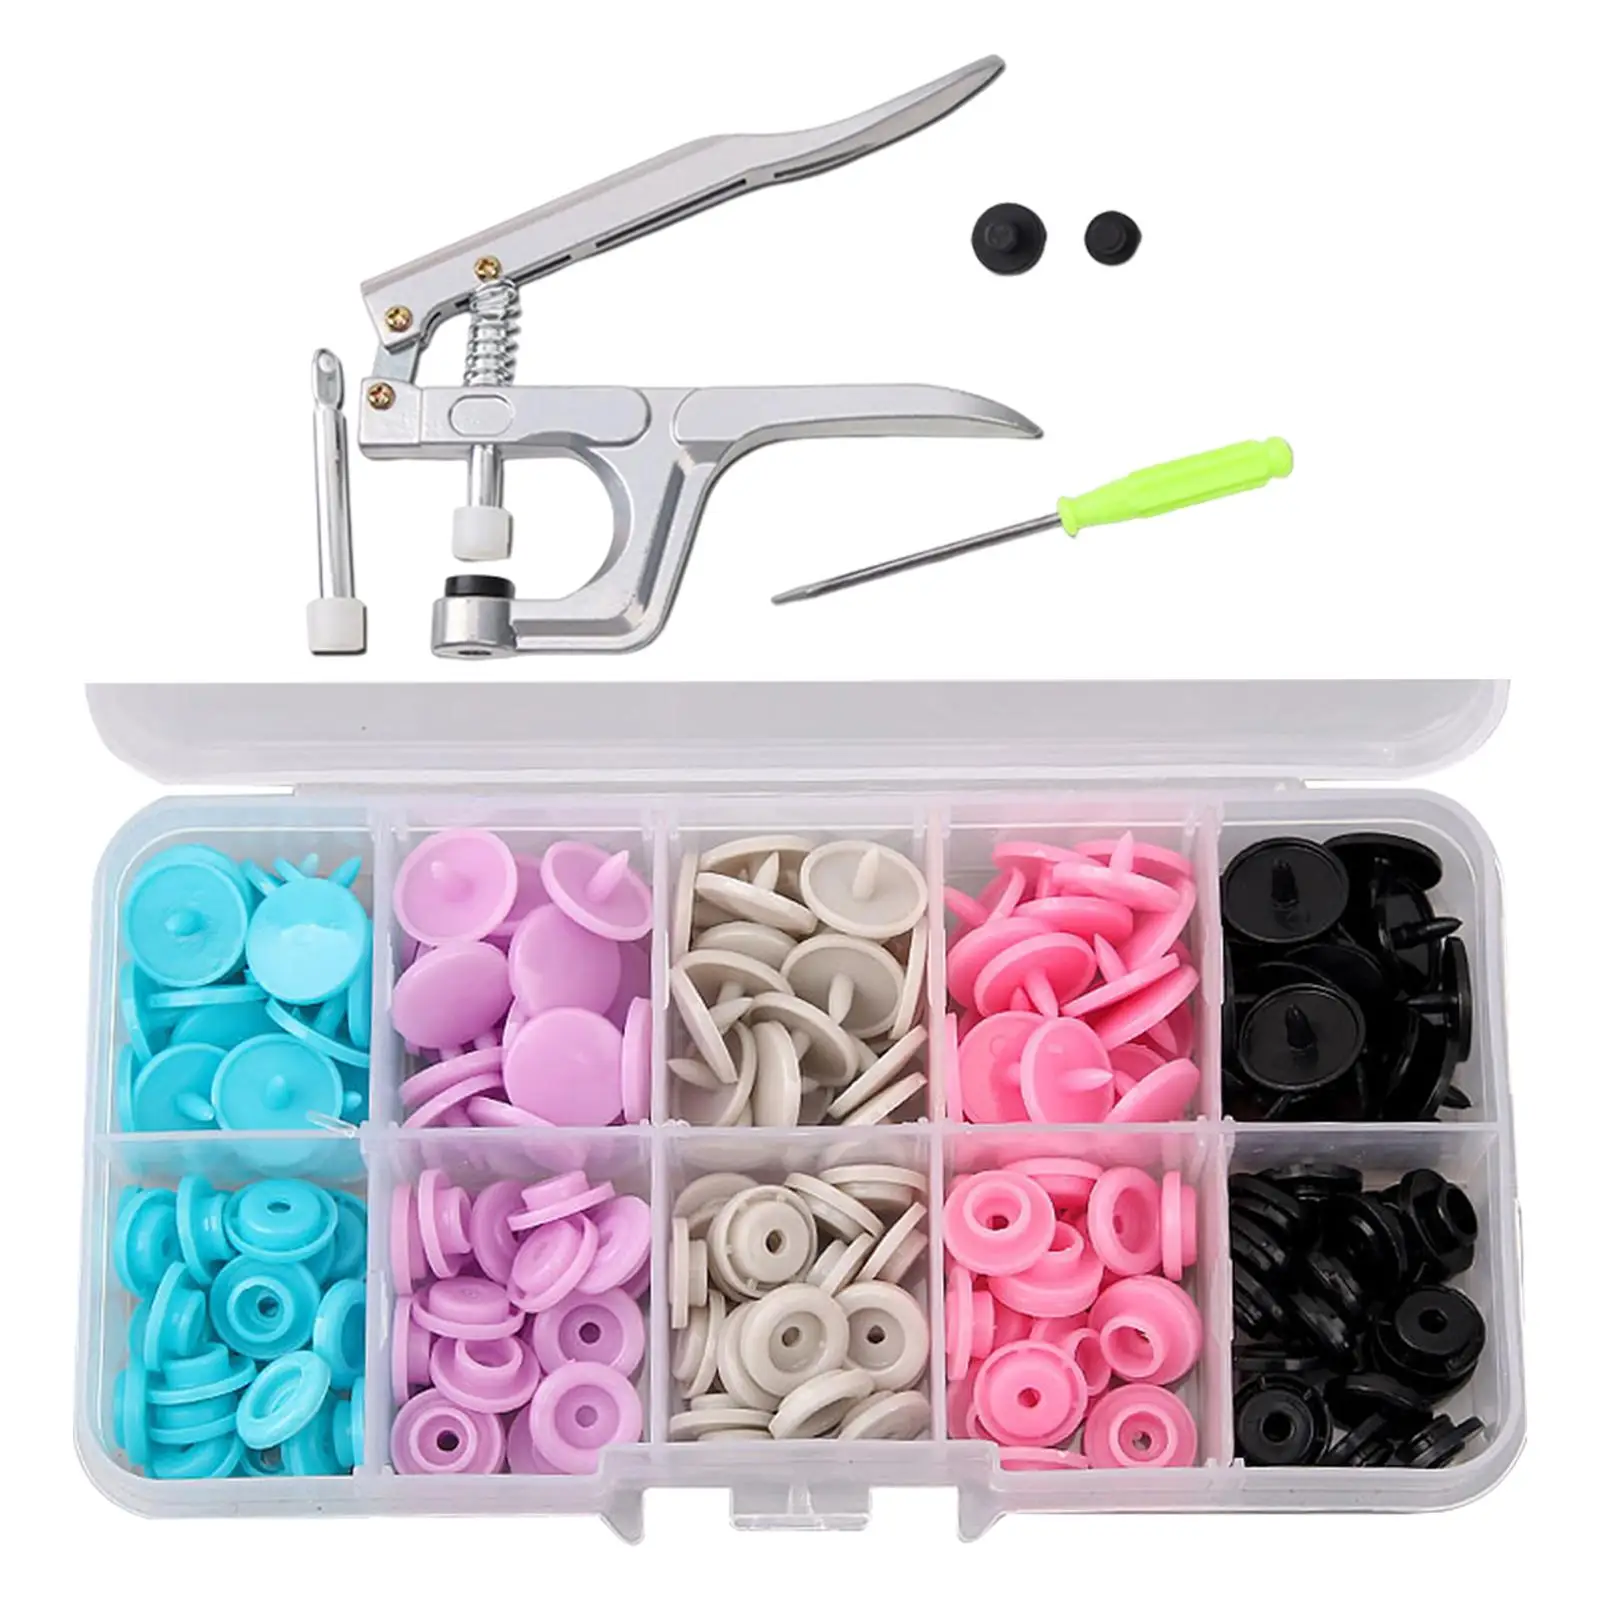 50 Sets Sewing Snaps Installation Tool Buttons Plastic Snaps Mixed Colors Snaps with Snap Pliers